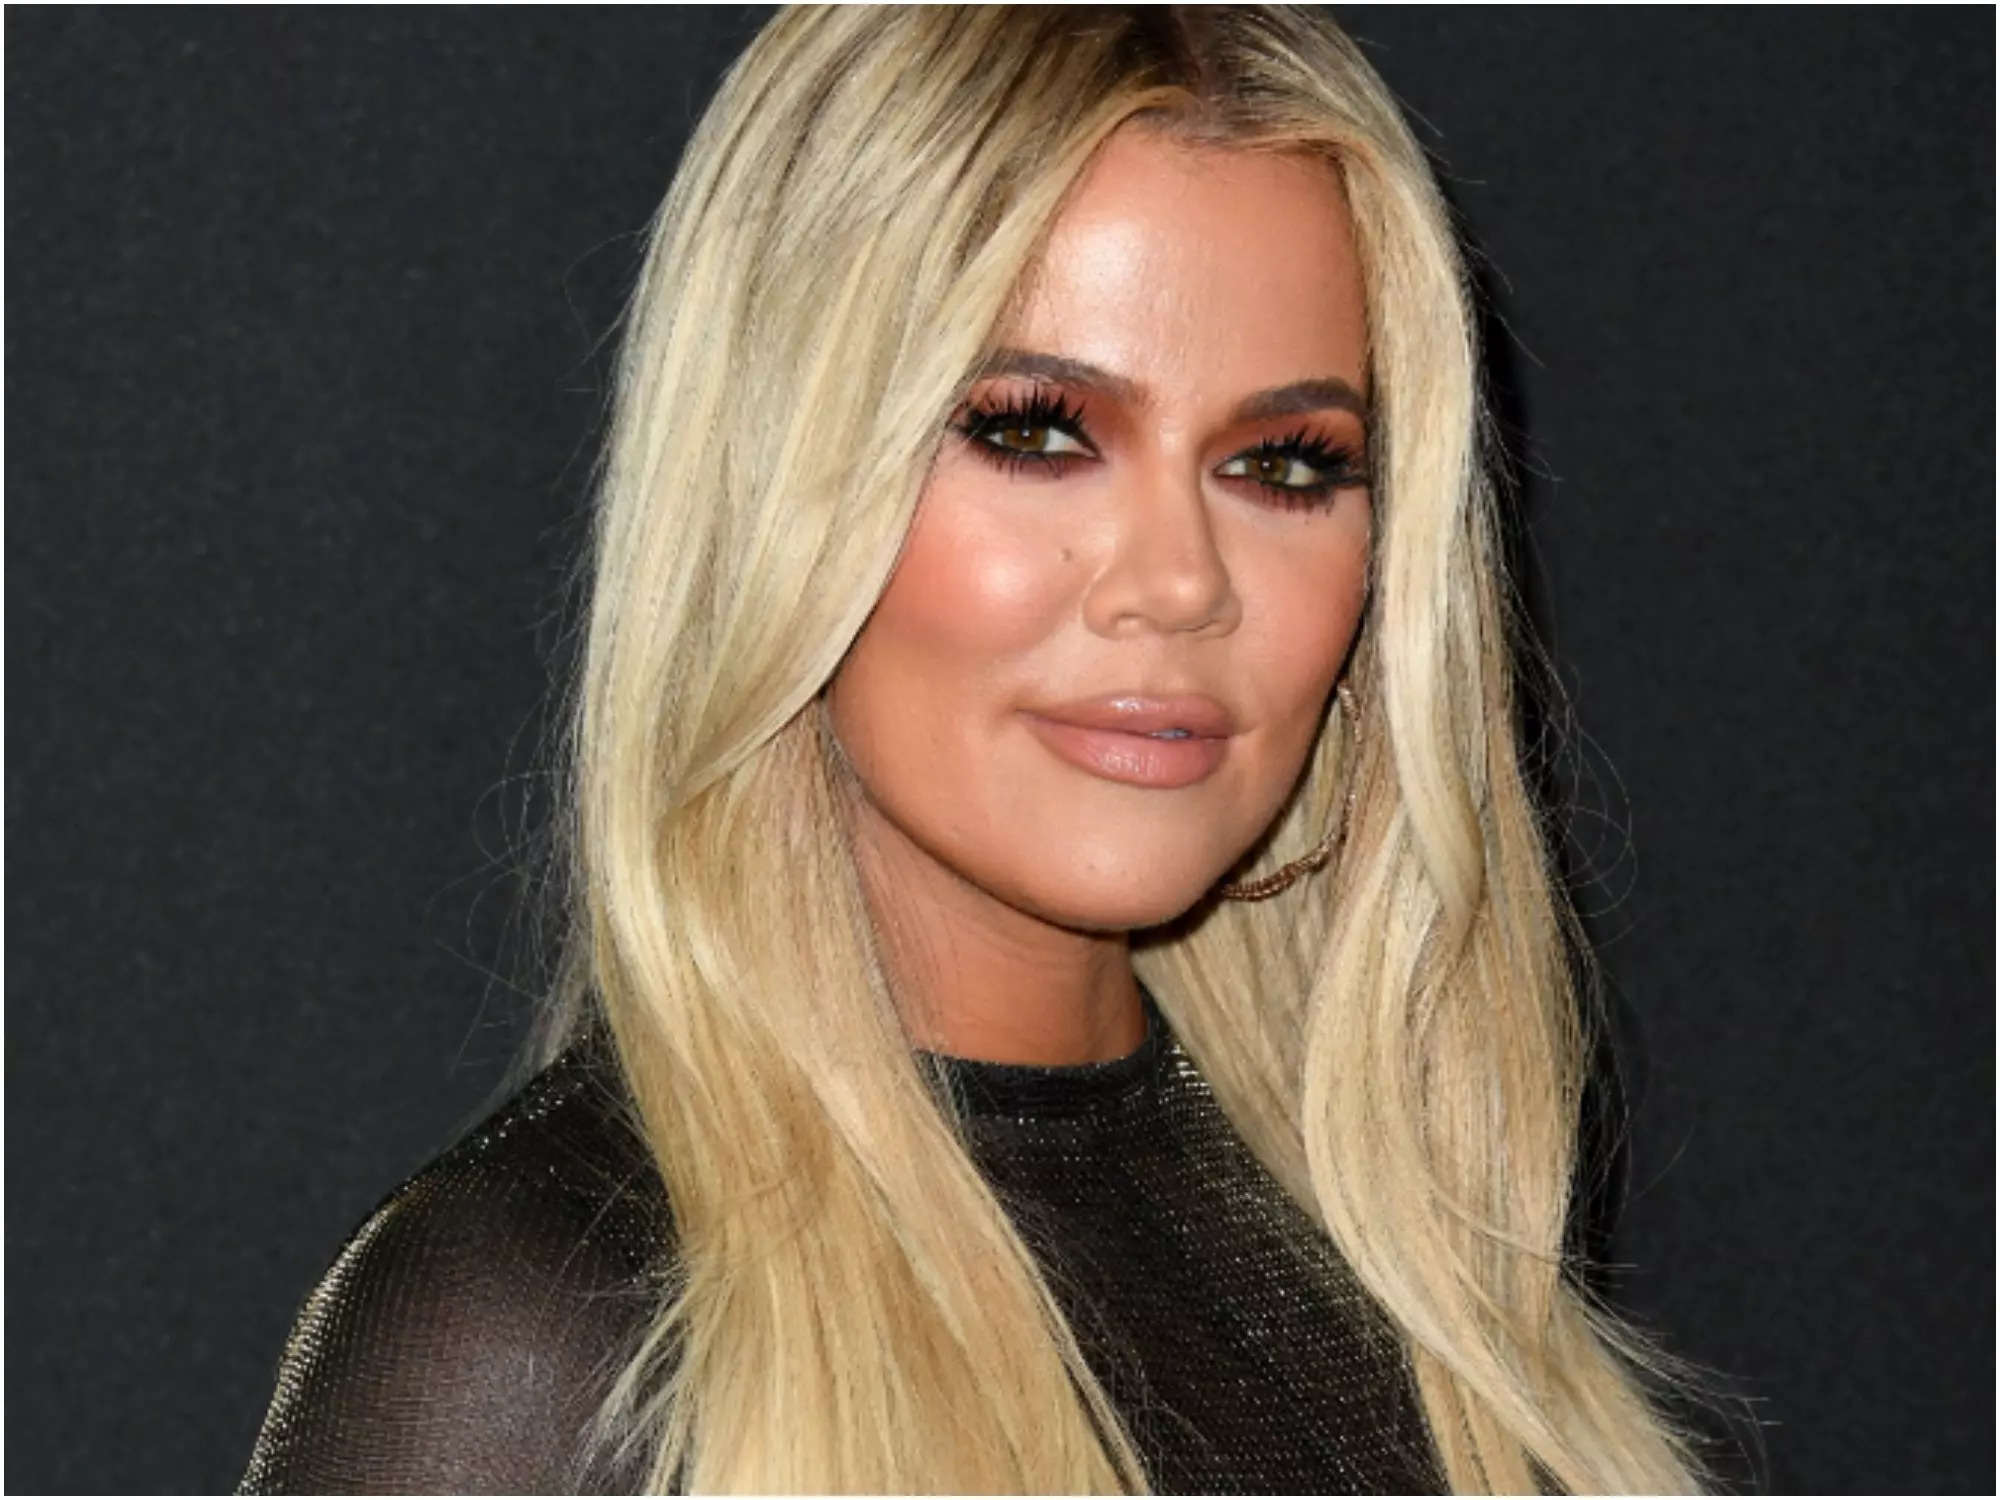 Khloé Kardashian Corrects People When They Call Her 3 Year Old Daughter